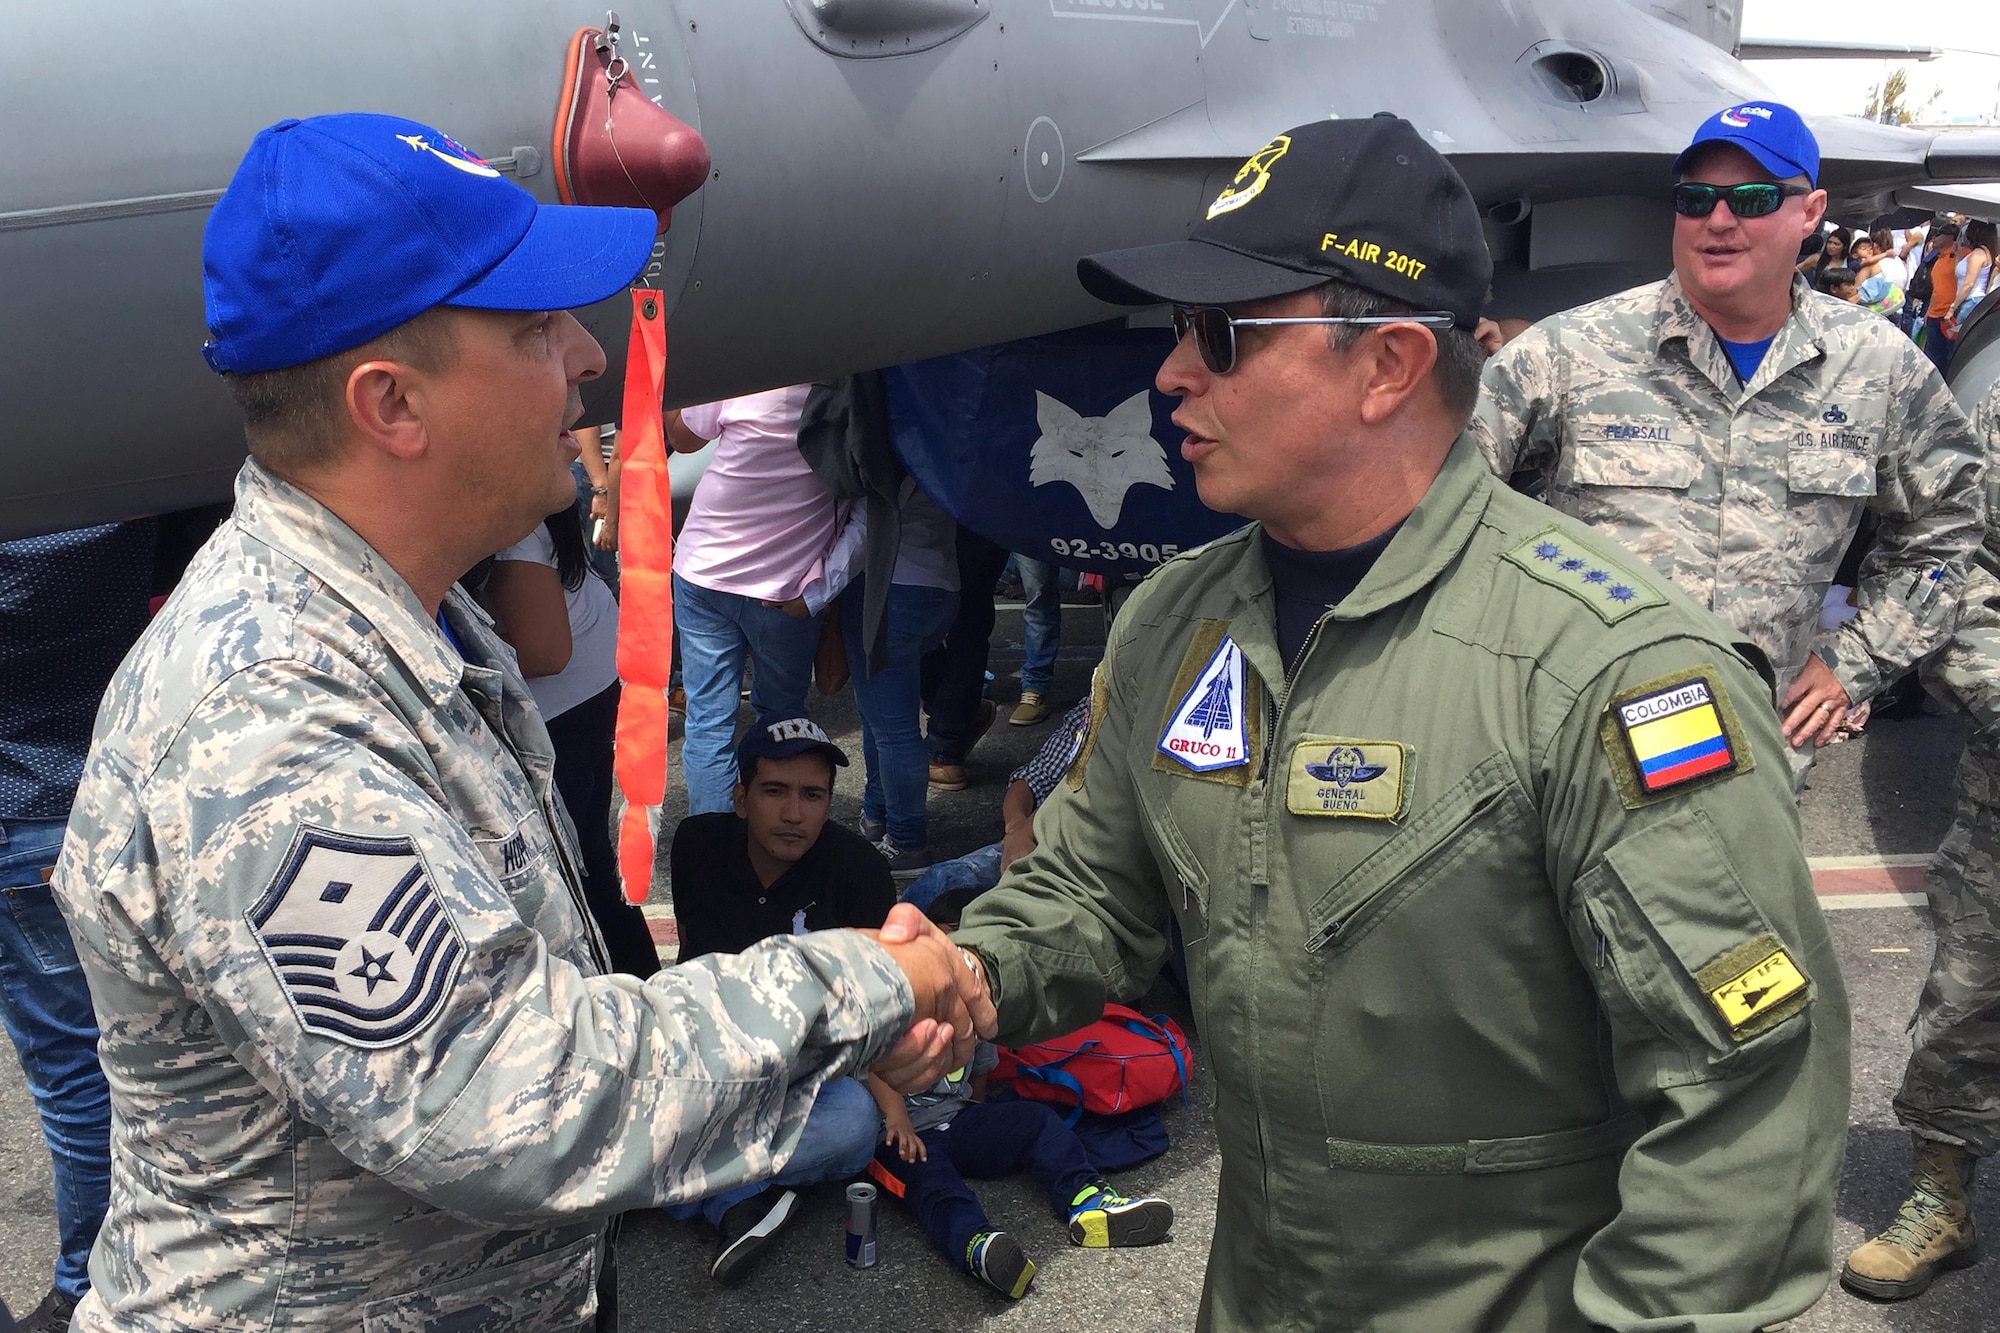 Colombian Air Force Gen. Carlos Bueno (right) speaks to Master Sgt. Jeff Hopper, during the Force’s Feria Aeronautica Internaccional – Colombia in Rionegro. Bueno thanked Airmen of the South Carolina Air National Guard’s 169th Fighter Wing for their support during the air show, July 16, 2017. The United States Air Force participated in the four-day air and trade show providing static displays of various aircraft to include the F-16, KC-10 and KC-135. During the air show the Air Combat Team’s Viper East Demo Team performed daily and a B-52 from US Strategic Command performed a flyover. The United States military participation in the air show provides an opportunity to strengthen our military-to-military relationships with regional partners and provides the opportunity to meet with Colombian air force counterparts. (U.S. Air National Guard photo by Capt. Stephen D. Hudson).